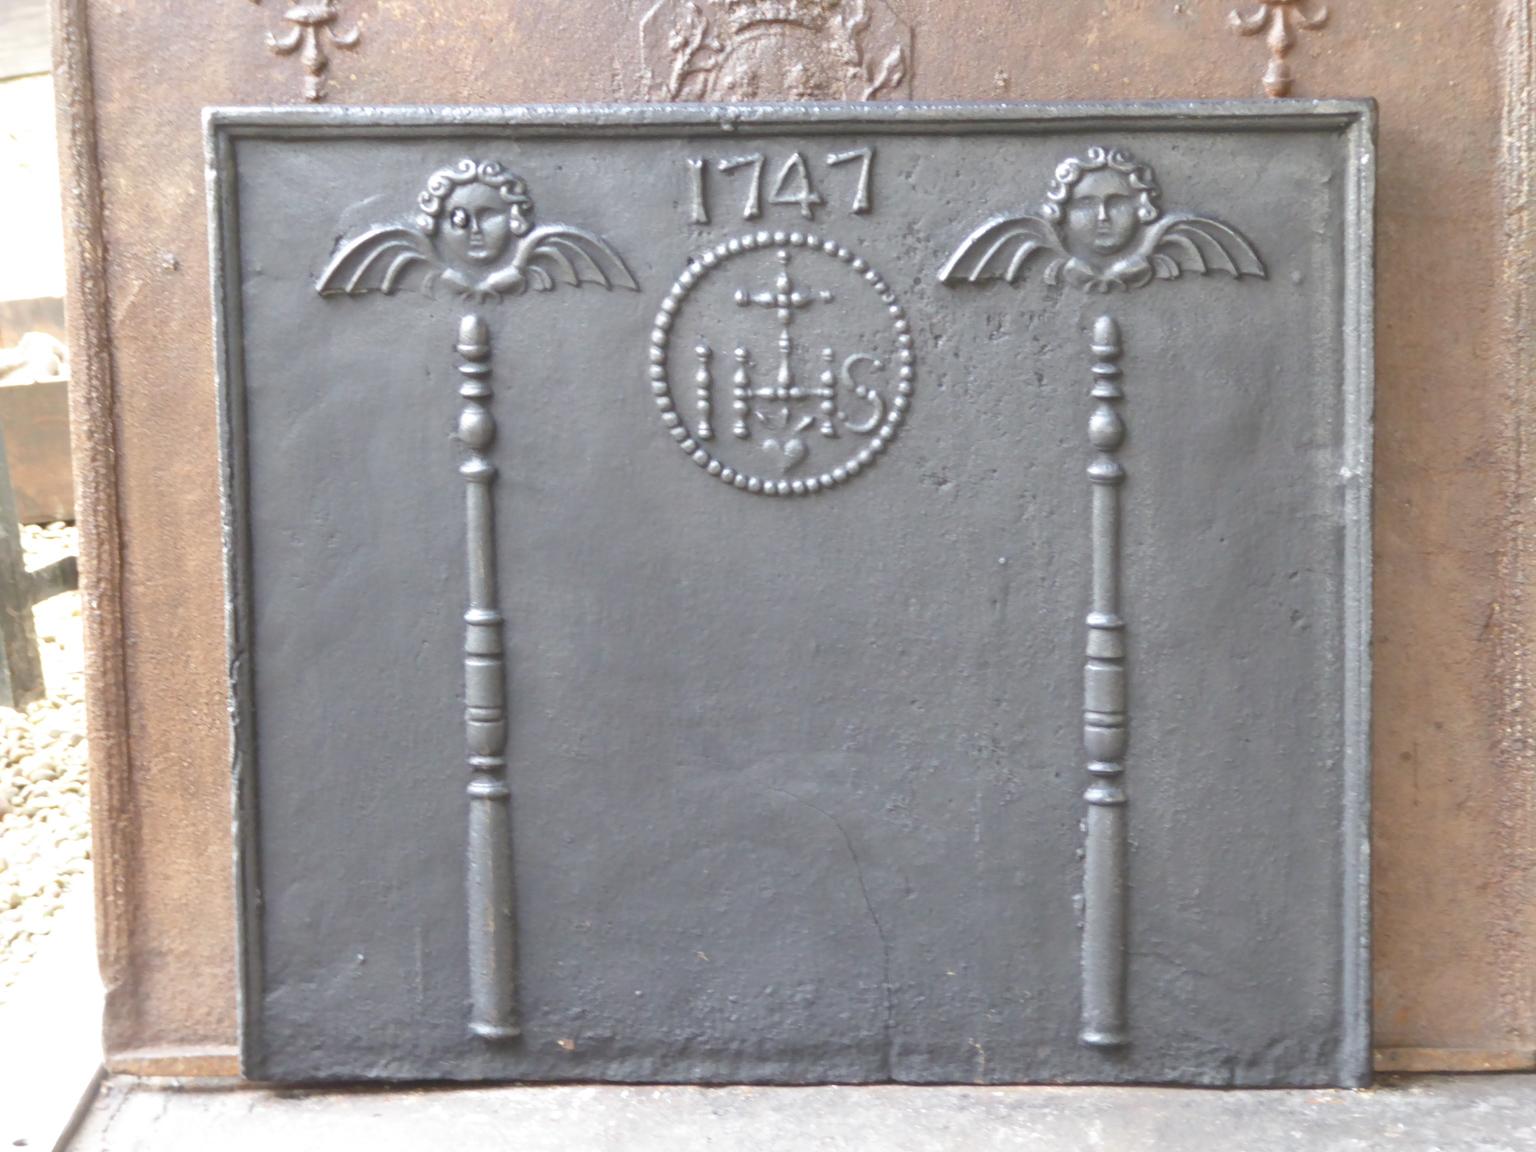 18th century Louis XV French fireback with pillars topped with angels, an IHS monogram, and the date of production 1747.

The monogram IHS stands for Iesus Hominum Salvator (Jesus the Savior of Humanity) or In Hoc Signo (In this sign will you win).